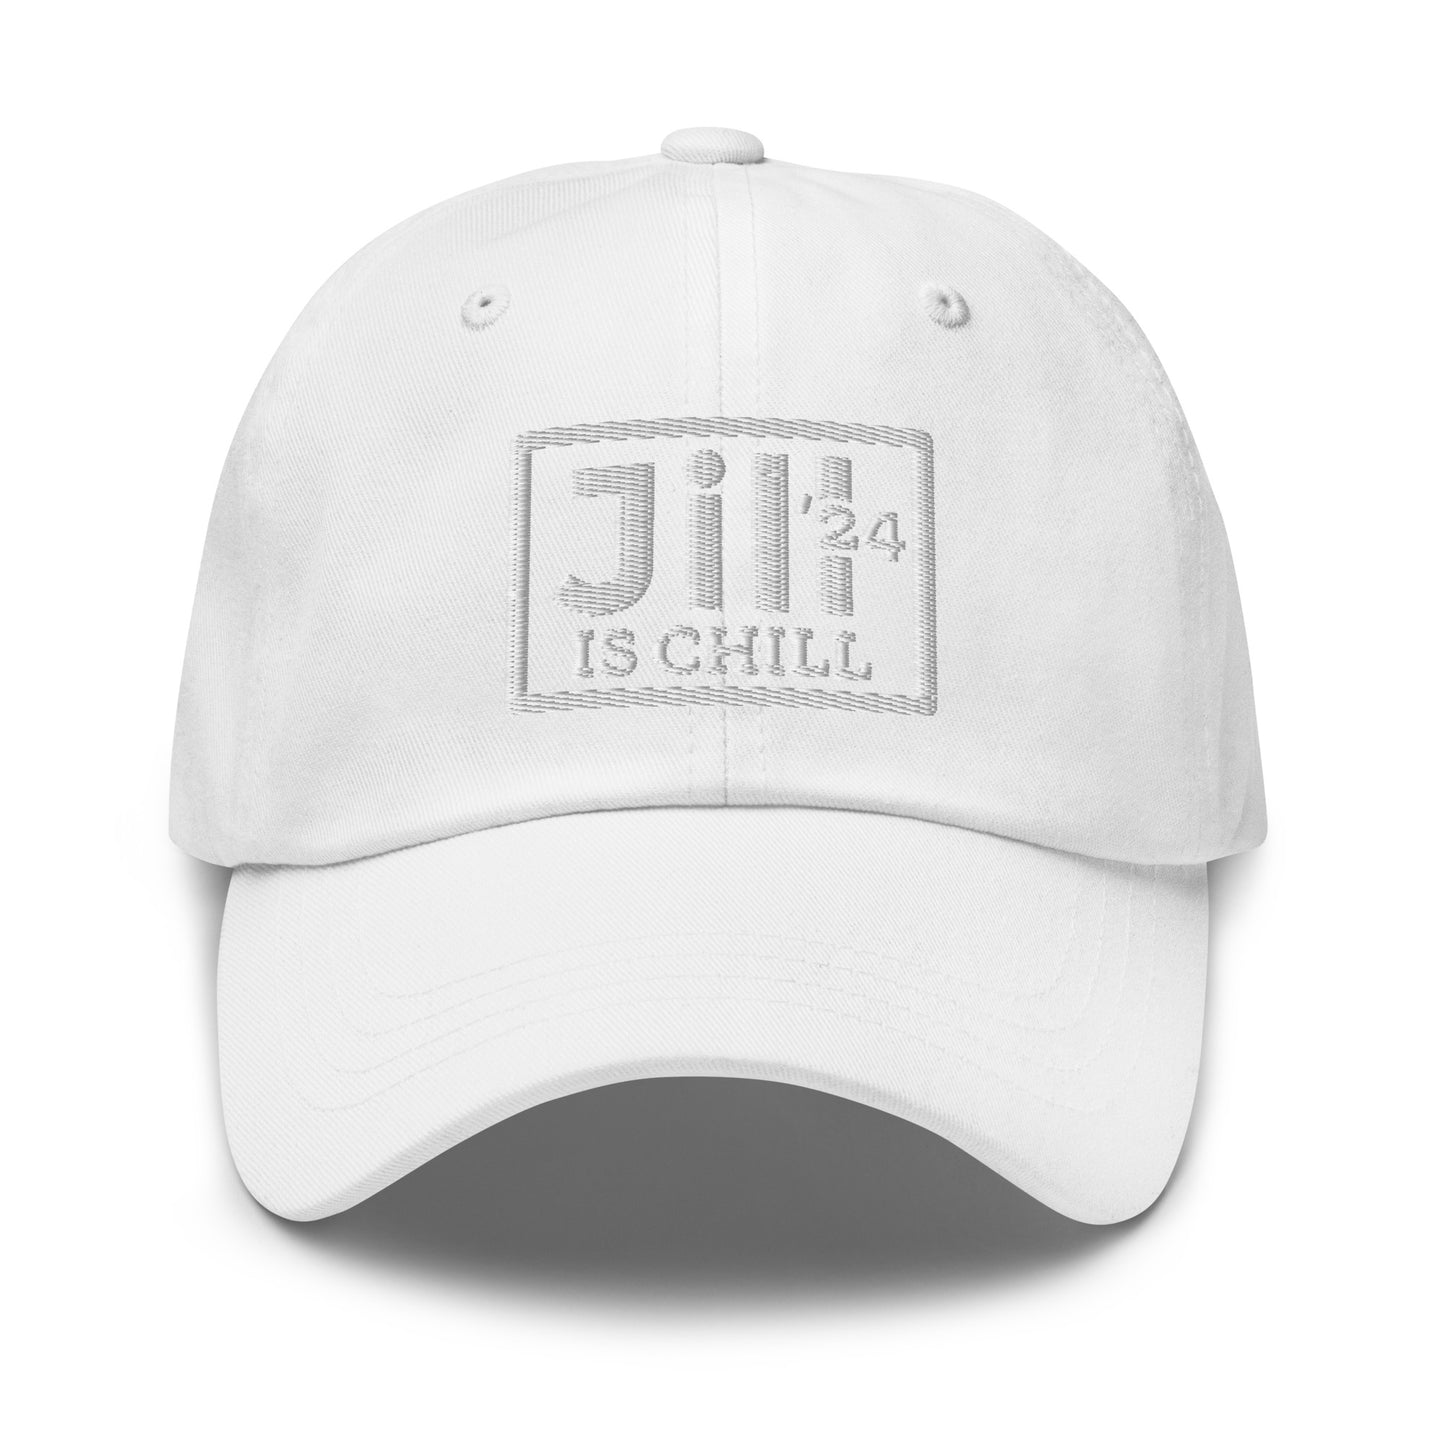 Jill is Chill Embroidered Organic Dad Hat